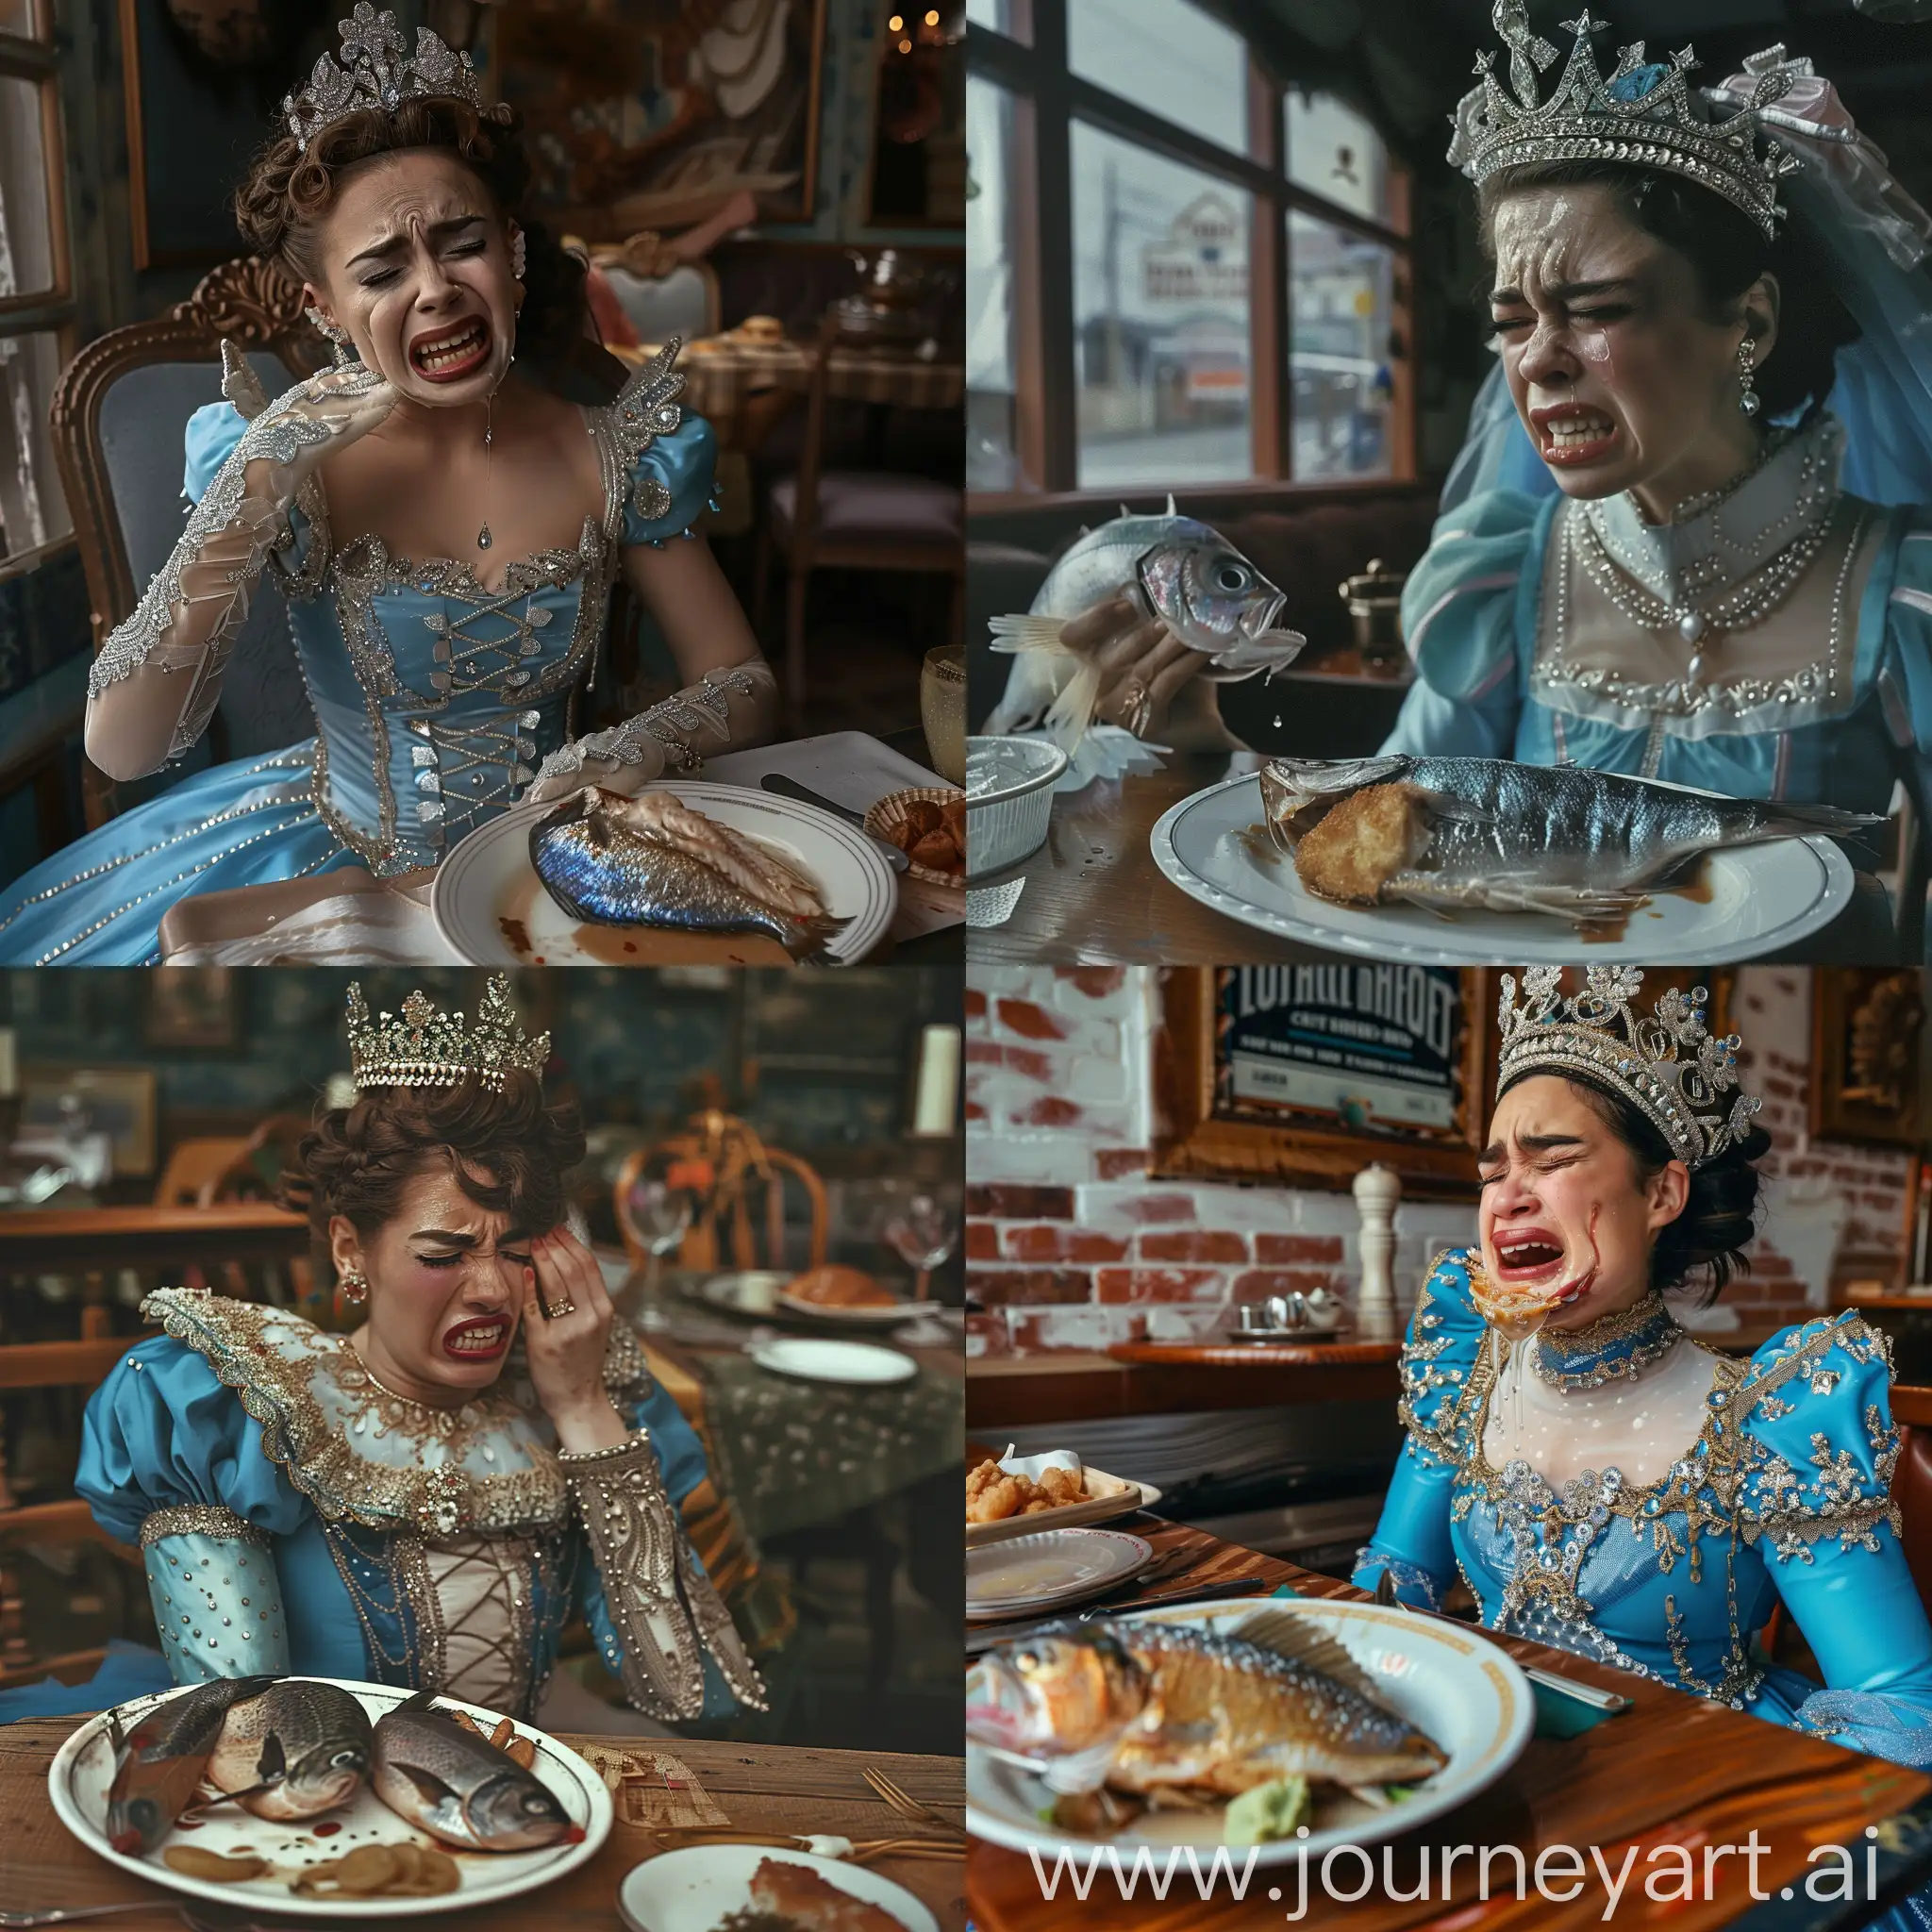 Sad-Princess-in-Blue-Dress-Crying-at-Diner-Table-with-Fish-Plate